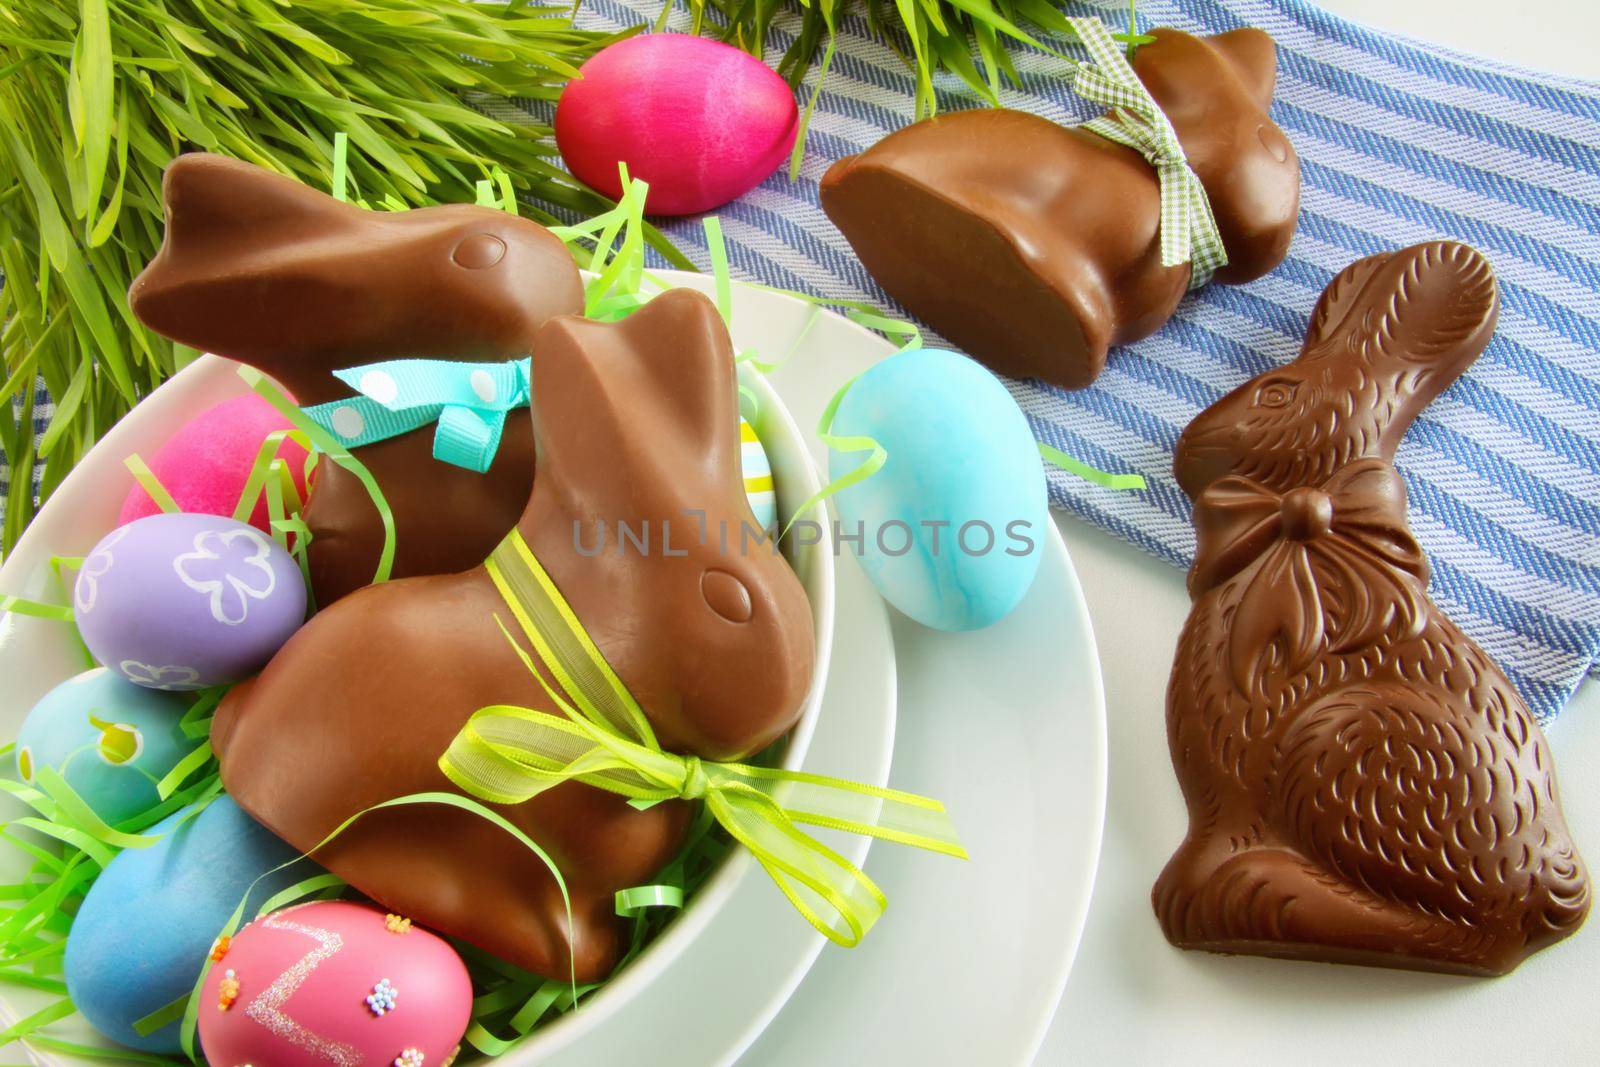 Chocolate Easter bunny and eggs on kitchen counter by Sandralise